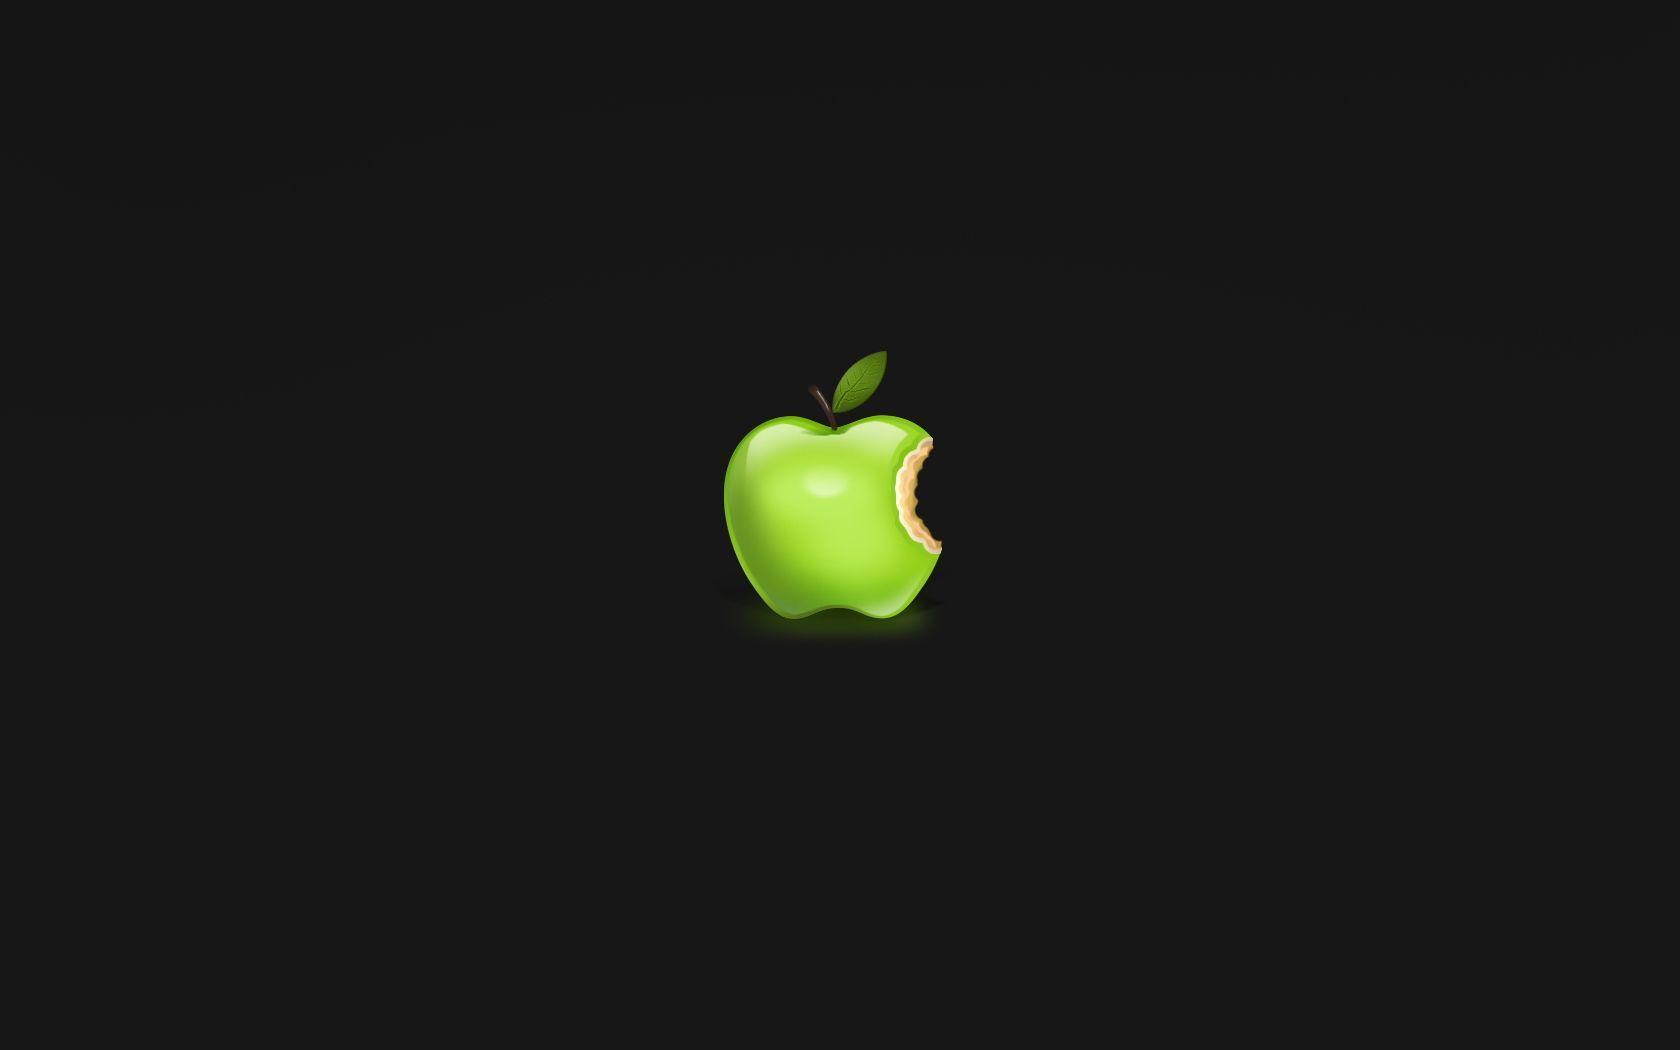 iPhone Apple Wallpapers - Wallpaper Cave